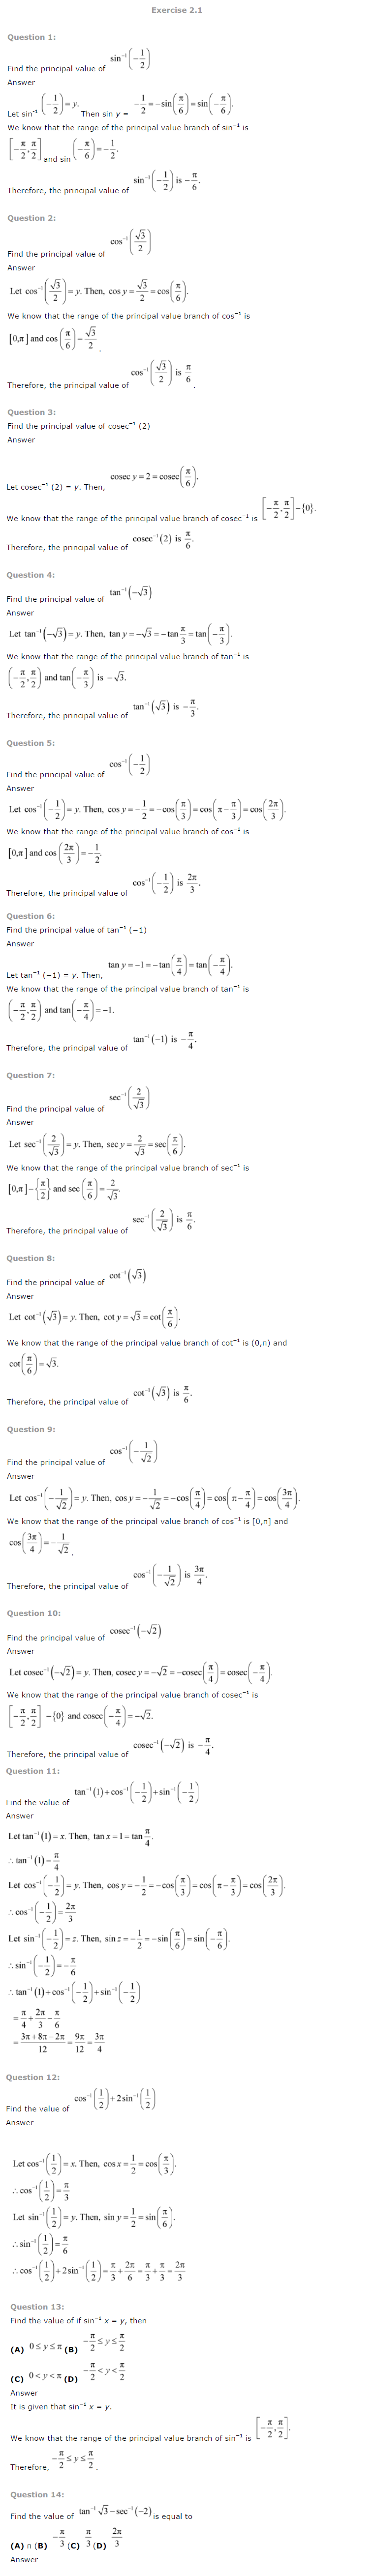 NCERT Solutions For Class 12 Maths Chapter 2 Inverse Trigonometric Functions 1